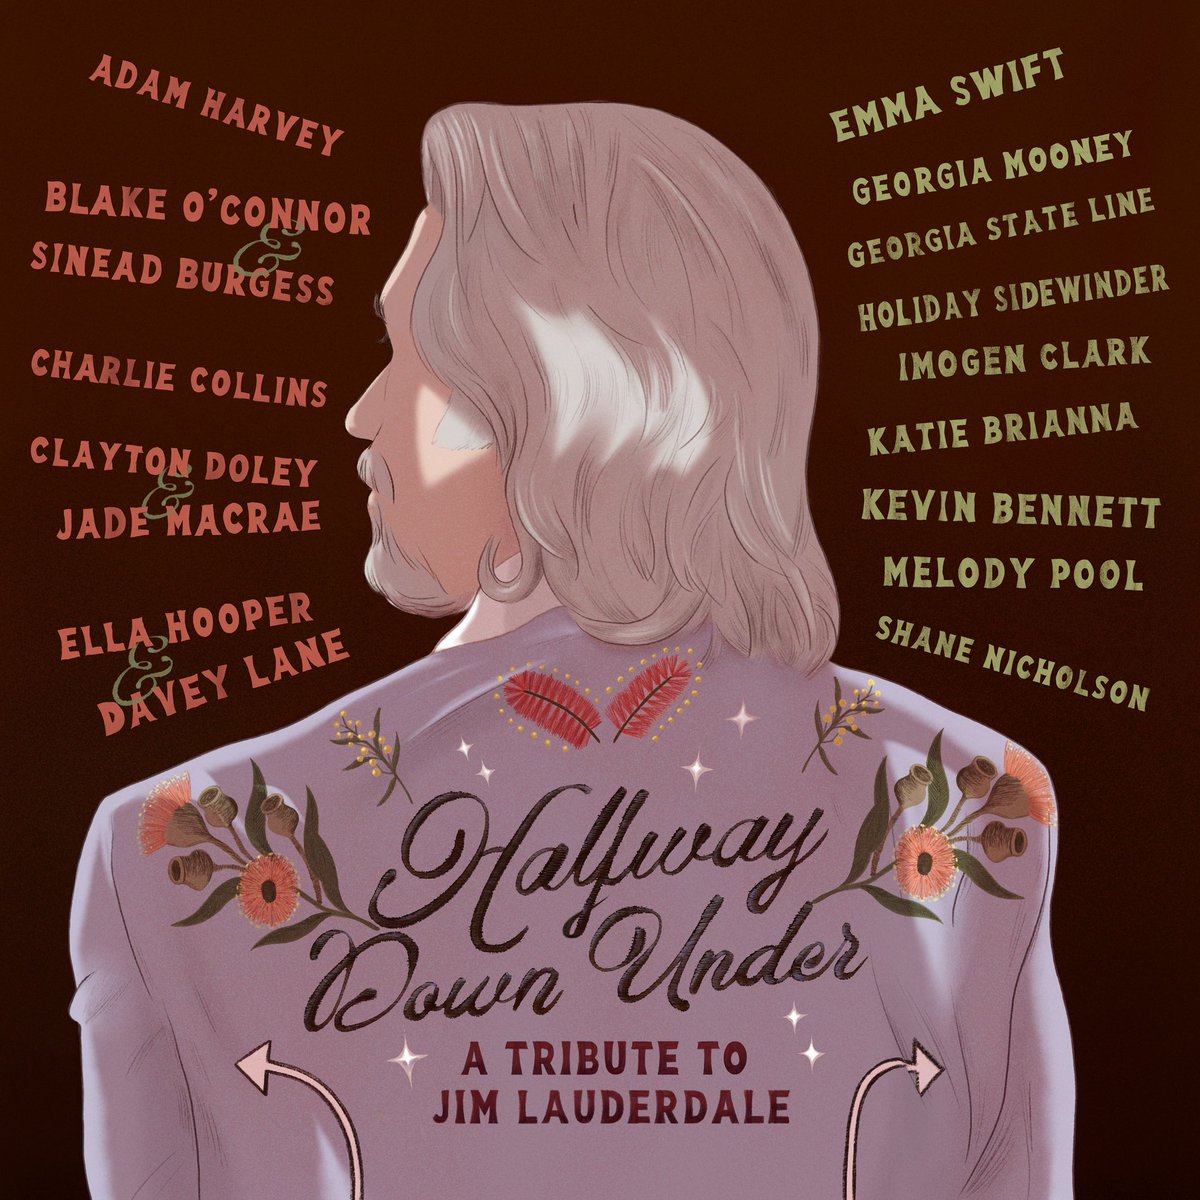 On March 10, we will be releasing Halfway Down Under: A Tribute to Jim Lauderdale, featuring all new interpretations of songs from throughout @jimlauderdale’s epic career by Australian artists. Check out tracks from @KatieBrianna and @Imogen_Clark now ffm.to/halfwaydownund…